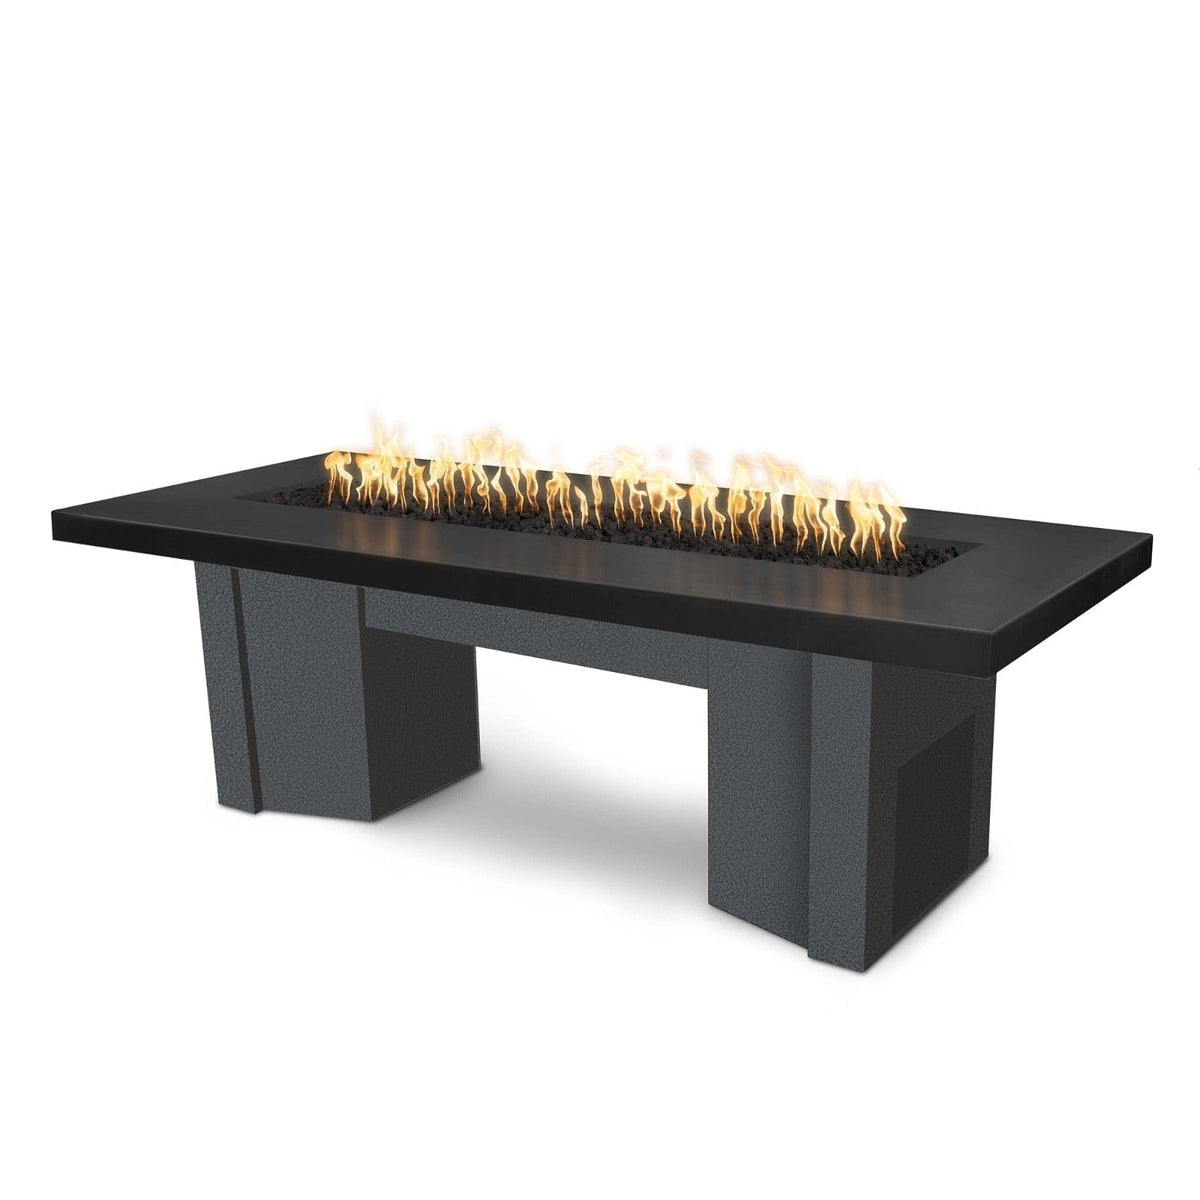 The Outdoor Plus Fire Features Black (-BLK) / Silver Vein Powder Coated Steel (-SLV) The Outdoor Plus 78&quot; Alameda Fire Table Smooth Concrete in Natural Gas - Flame Sense System with Push Button Spark Igniter / OPT-ALMGFRC78FSEN-NG